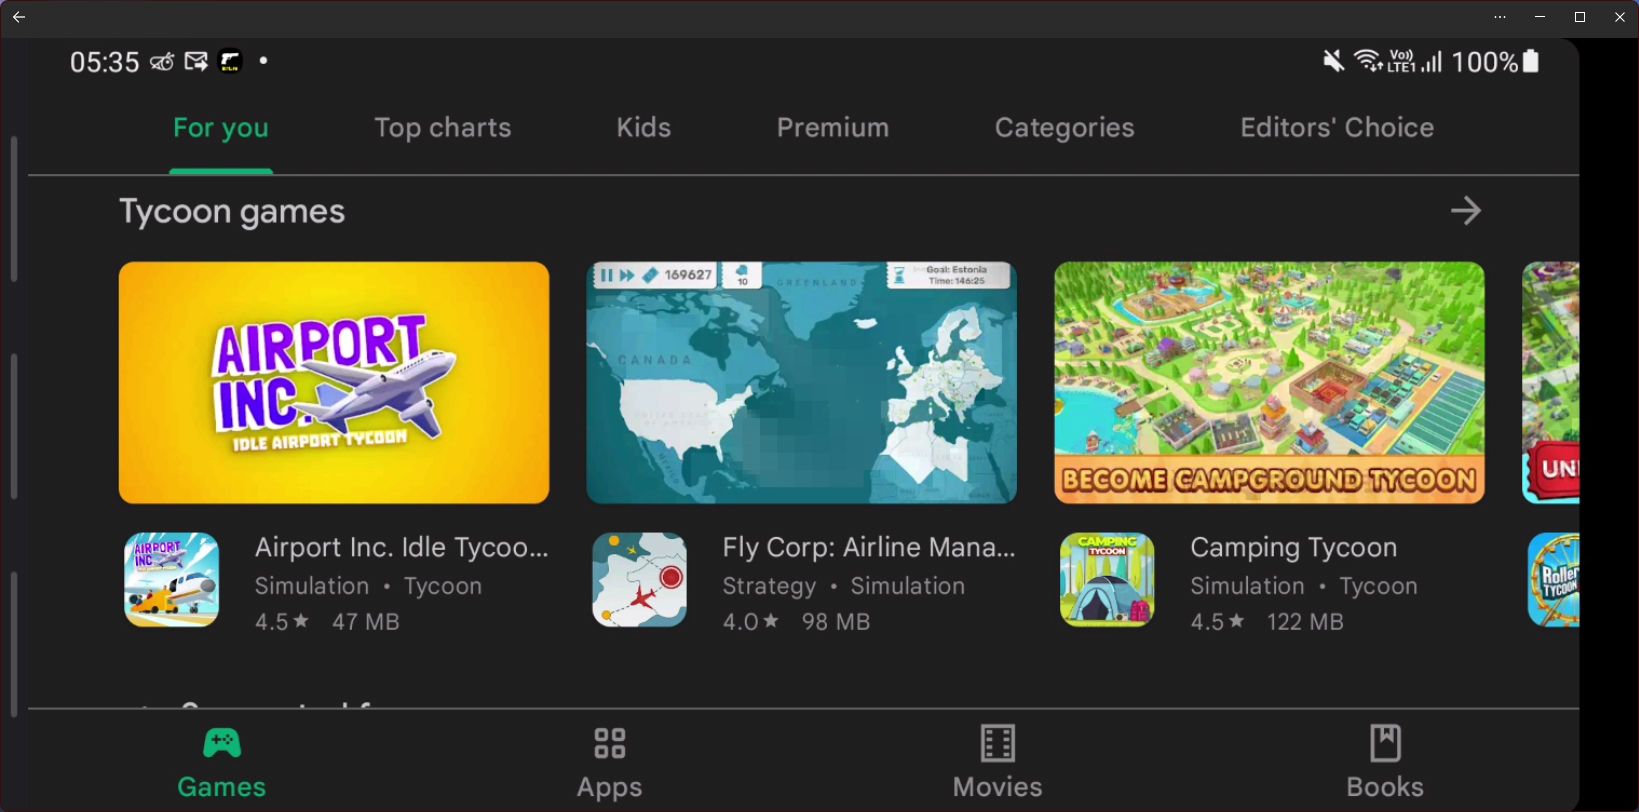 Google Play Store seen on Windows 11 via Your Phone screen mirroring function